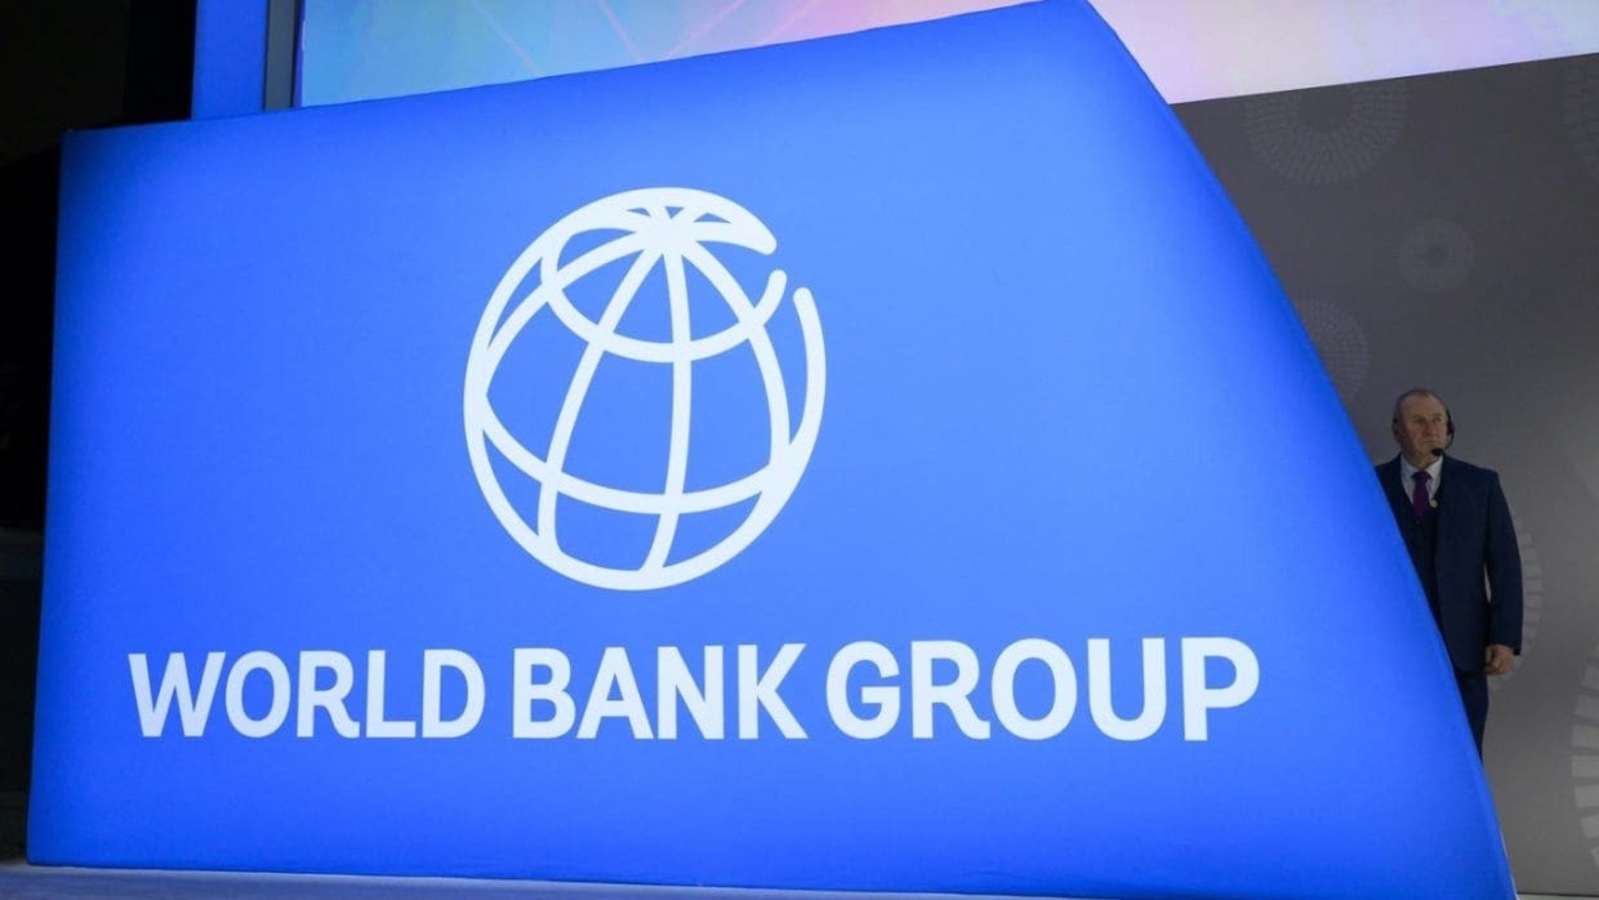 World Bank to discontinue 'Doing Business' reports after irregularities  found in data | World News - Hindustan Times